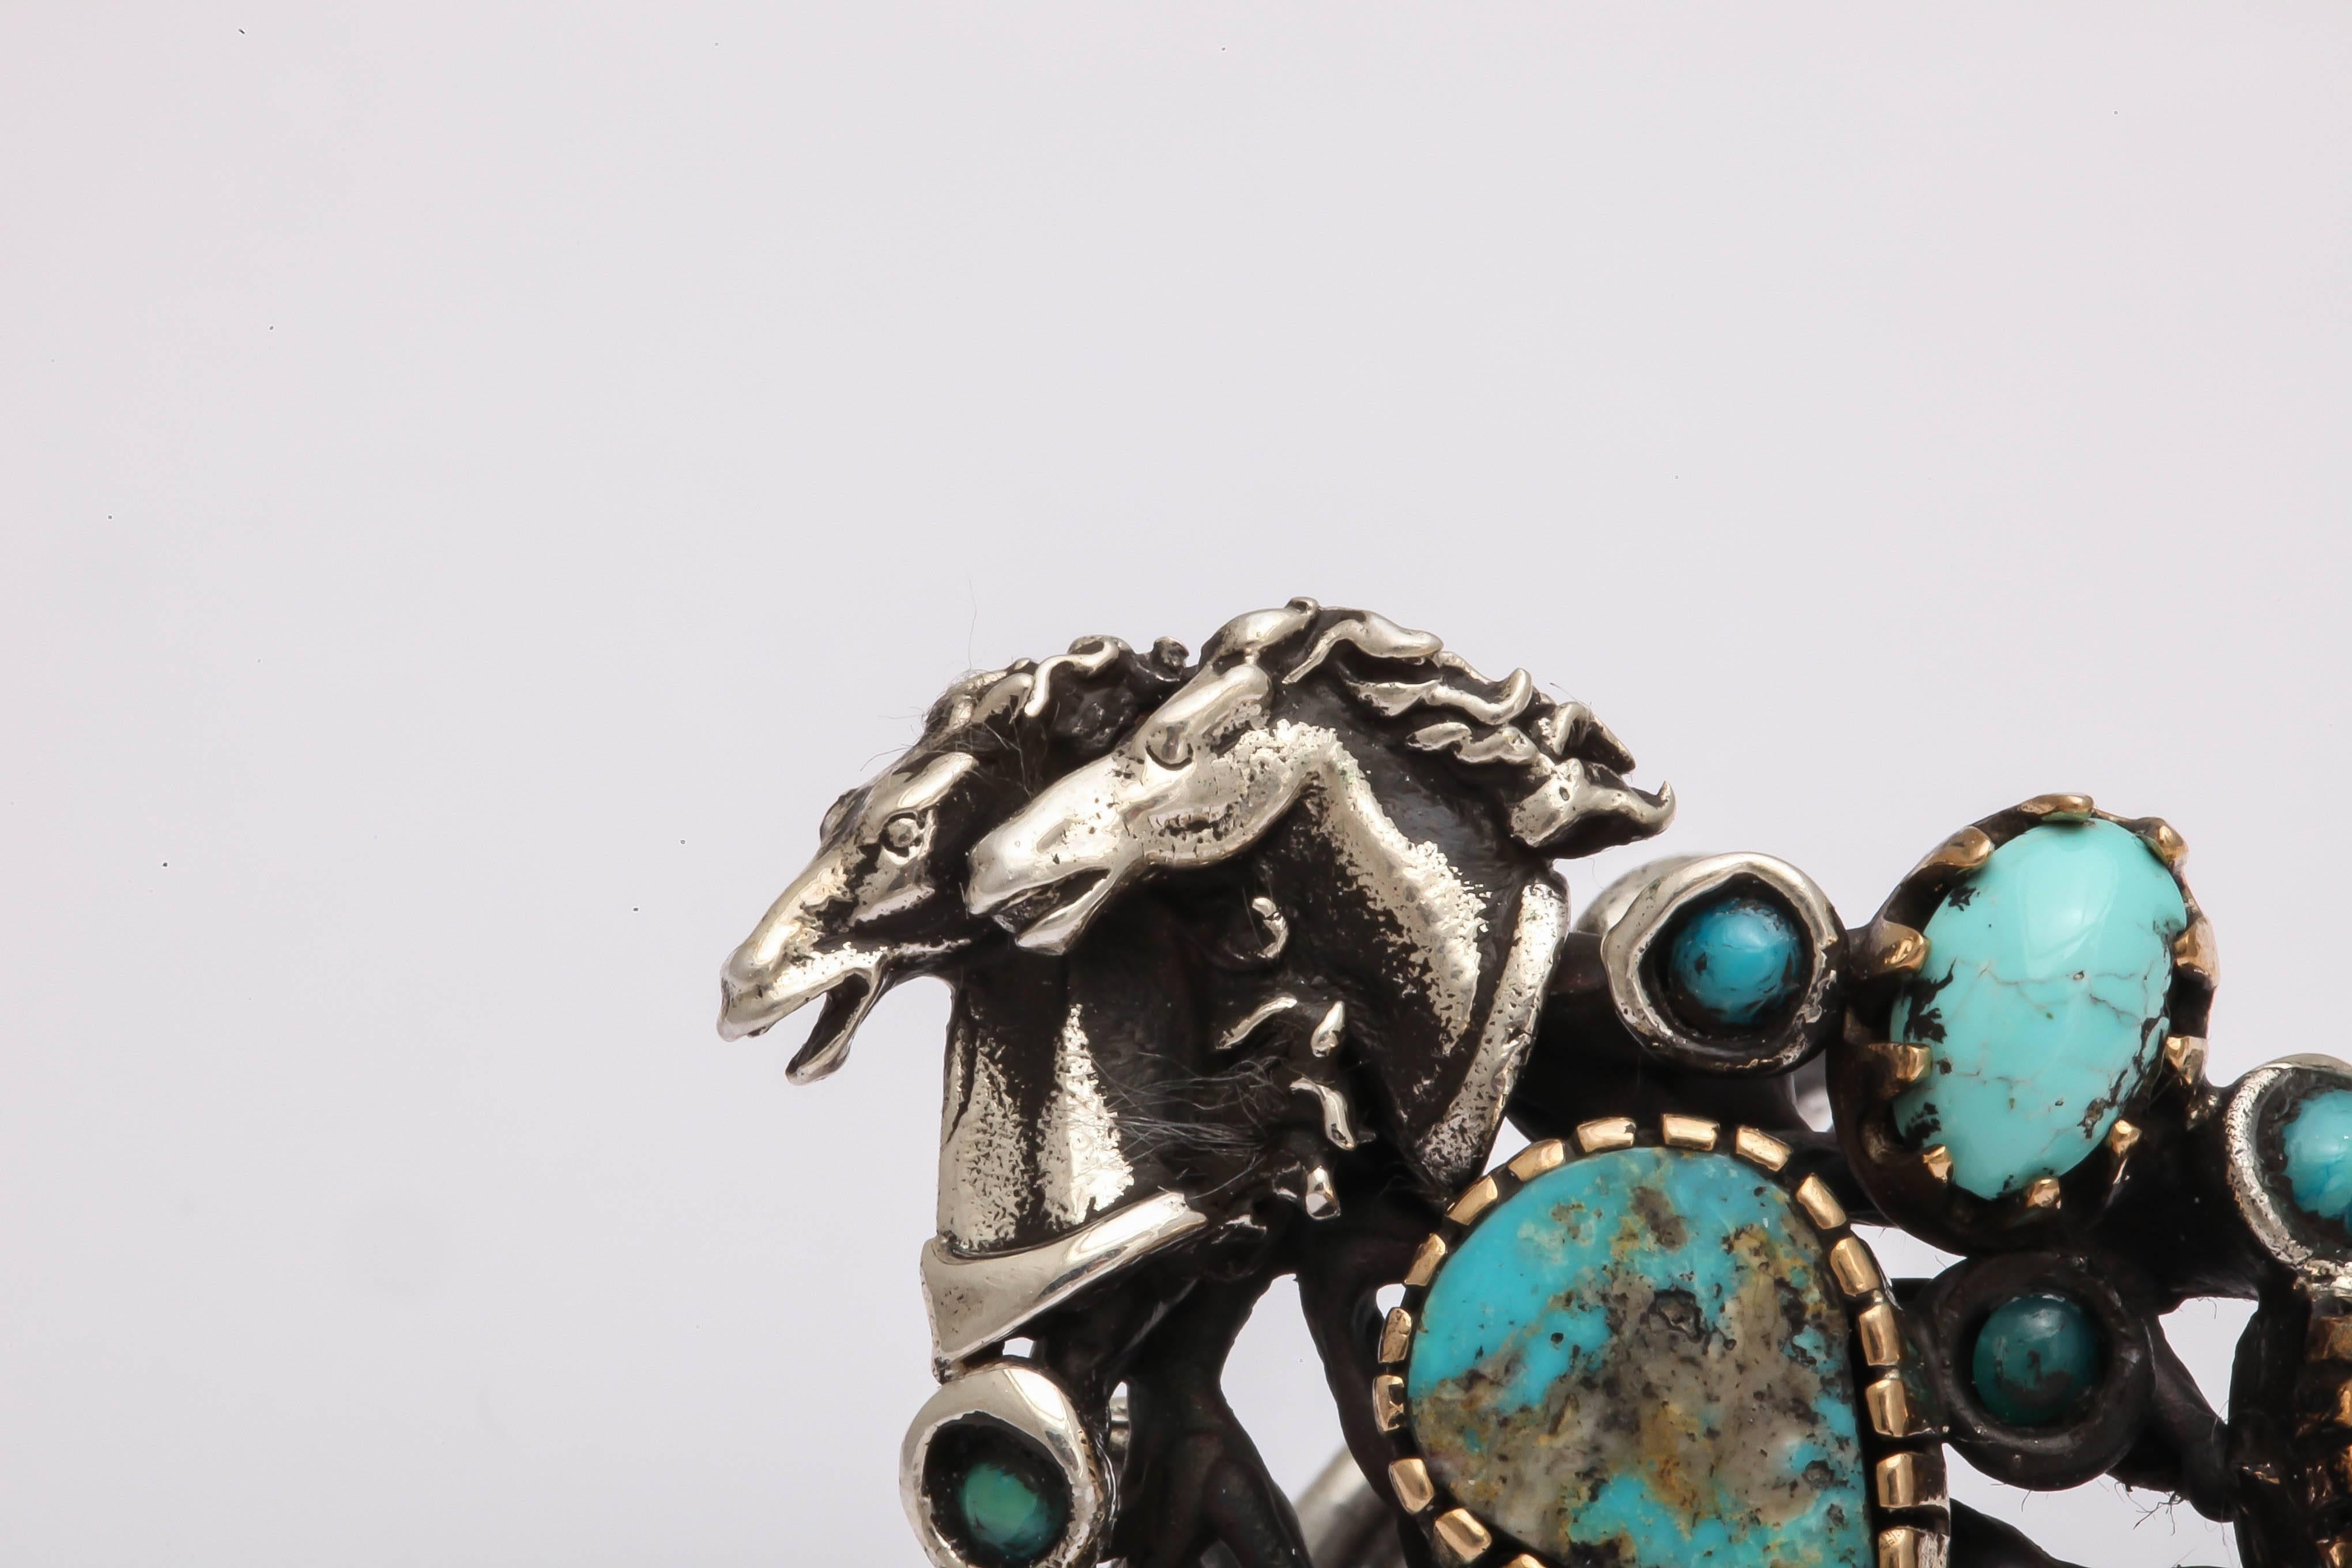 Great looking and impressive ring for the horse enthusiast. The shank is adjustable and is suitable for men or women. The turquoise stones are set in various styles to give the ring texture and interest. The silver is oxidized for a vintage look.